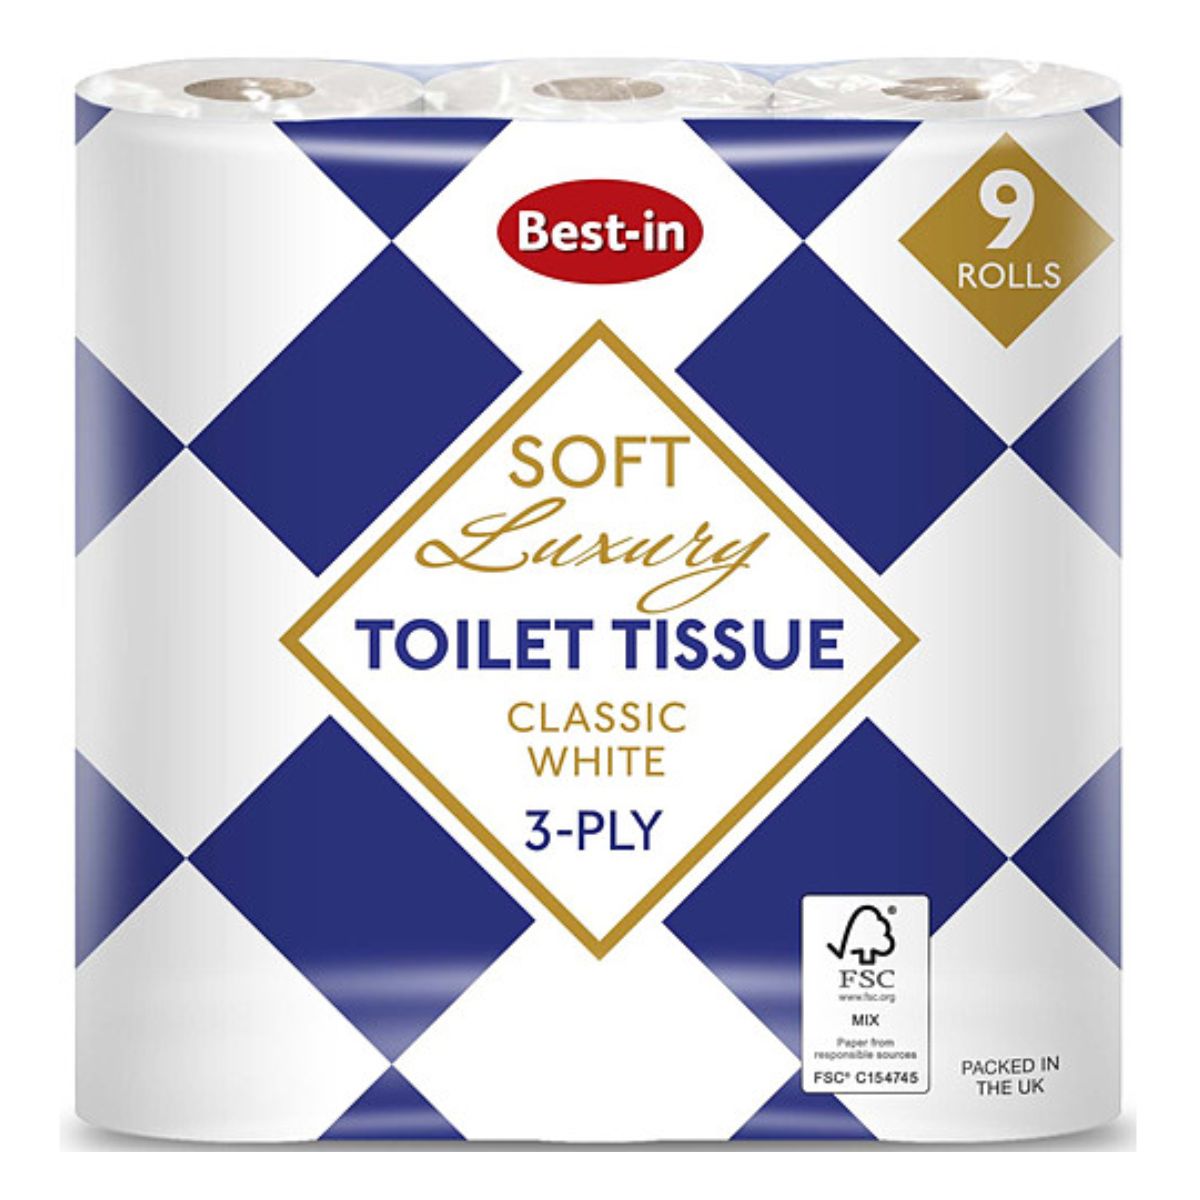 Pack of 9 Best In luxury toilet tissue white rolls with a blue and white checker pattern and a label reading "soft luxury toilet tissue, classic white," certified by fsc.